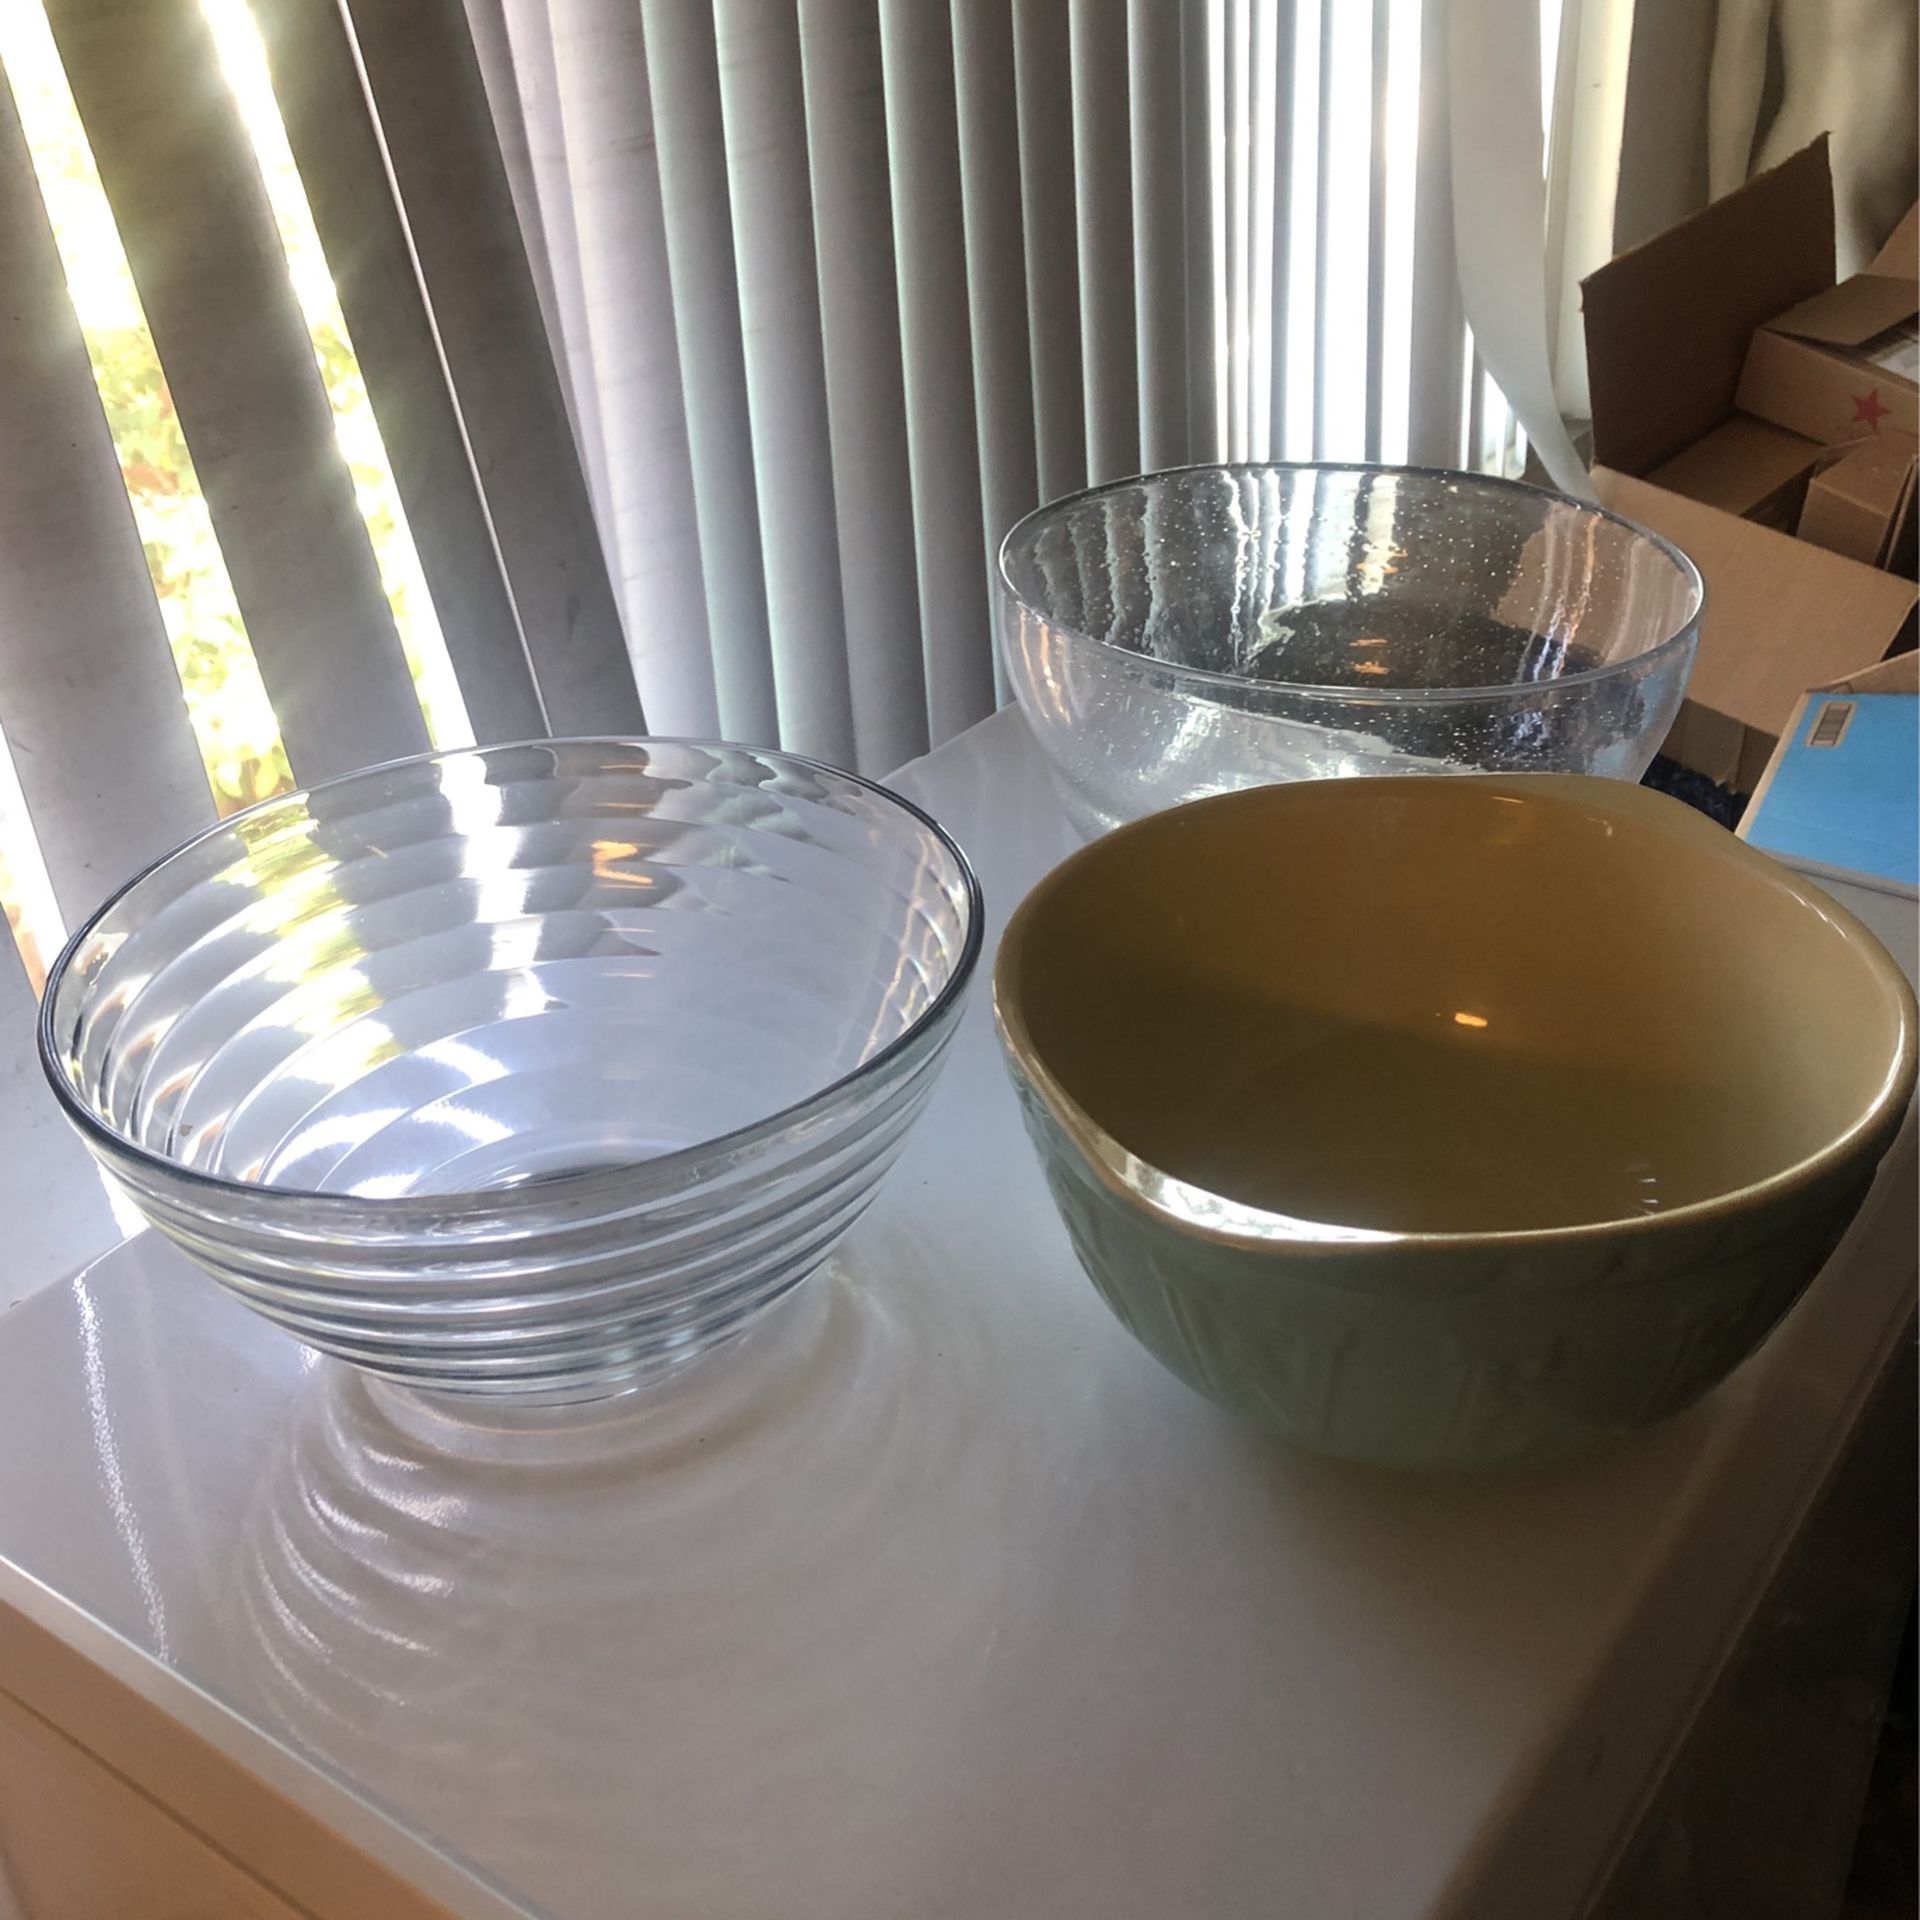 3 Big Mixing Glass N One Ceramic Bowls New Never Used Just Bought N Never Really Used Them Because There Heavy For My Hands $10 Each 